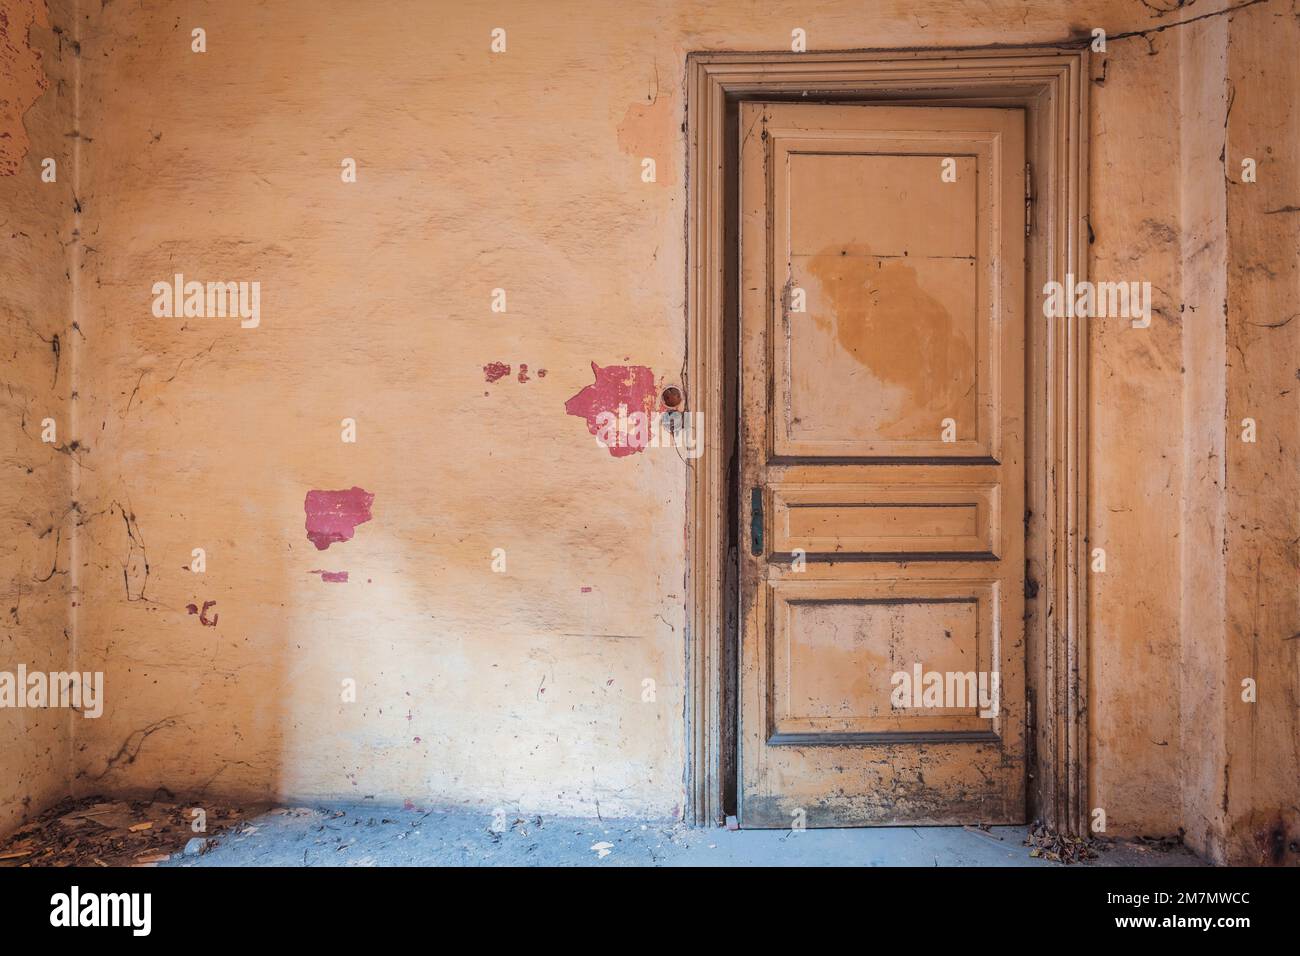 Italy, Veneto, dusty room of an abandoned house, closed door and salmon pink walls Stock Photo